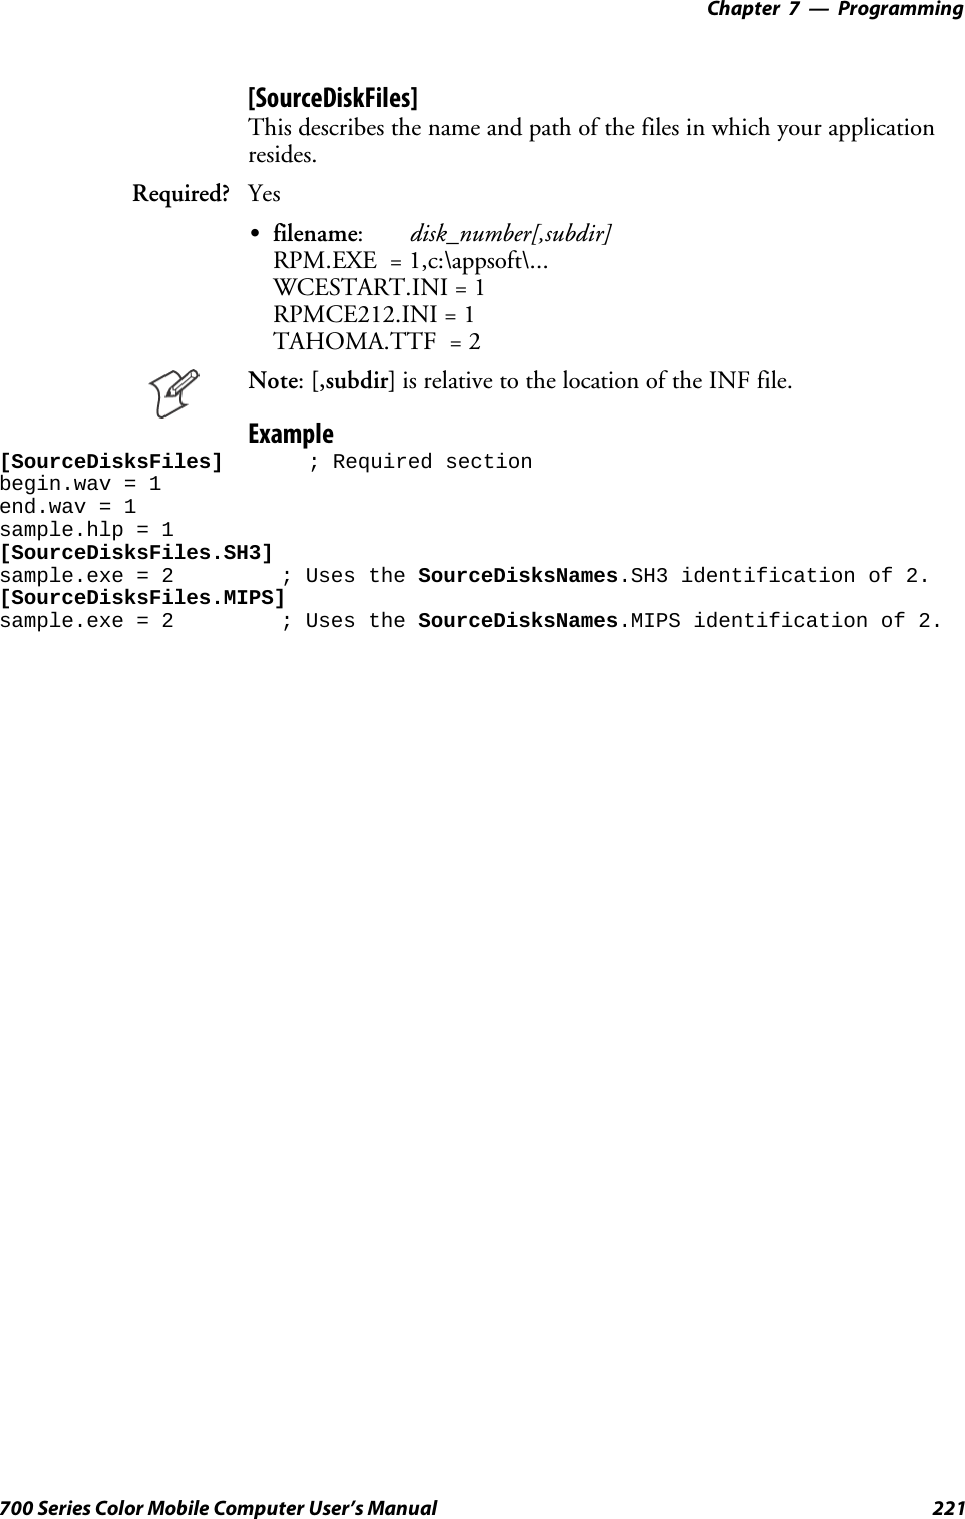 Programming—Chapter 7221700 Series Color Mobile Computer User’s Manual[SourceDiskFiles]This describes the name and path of the files in which your applicationresides.Required? YesSfilename:disk_number[,subdir]RPM.EXE = 1,c:\appsoft\...WCESTART.INI = 1RPMCE212.INI = 1TAHOMA.TTF = 2Note:[,subdir] is relative to the location of the INF file.Example[SourceDisksFiles] ; Required sectionbegin.wav = 1end.wav = 1sample.hlp = 1[SourceDisksFiles.SH3]sample.exe = 2 ; Uses the SourceDisksNames.SH3 identification of 2.[SourceDisksFiles.MIPS]sample.exe = 2 ; Uses the SourceDisksNames.MIPS identification of 2.